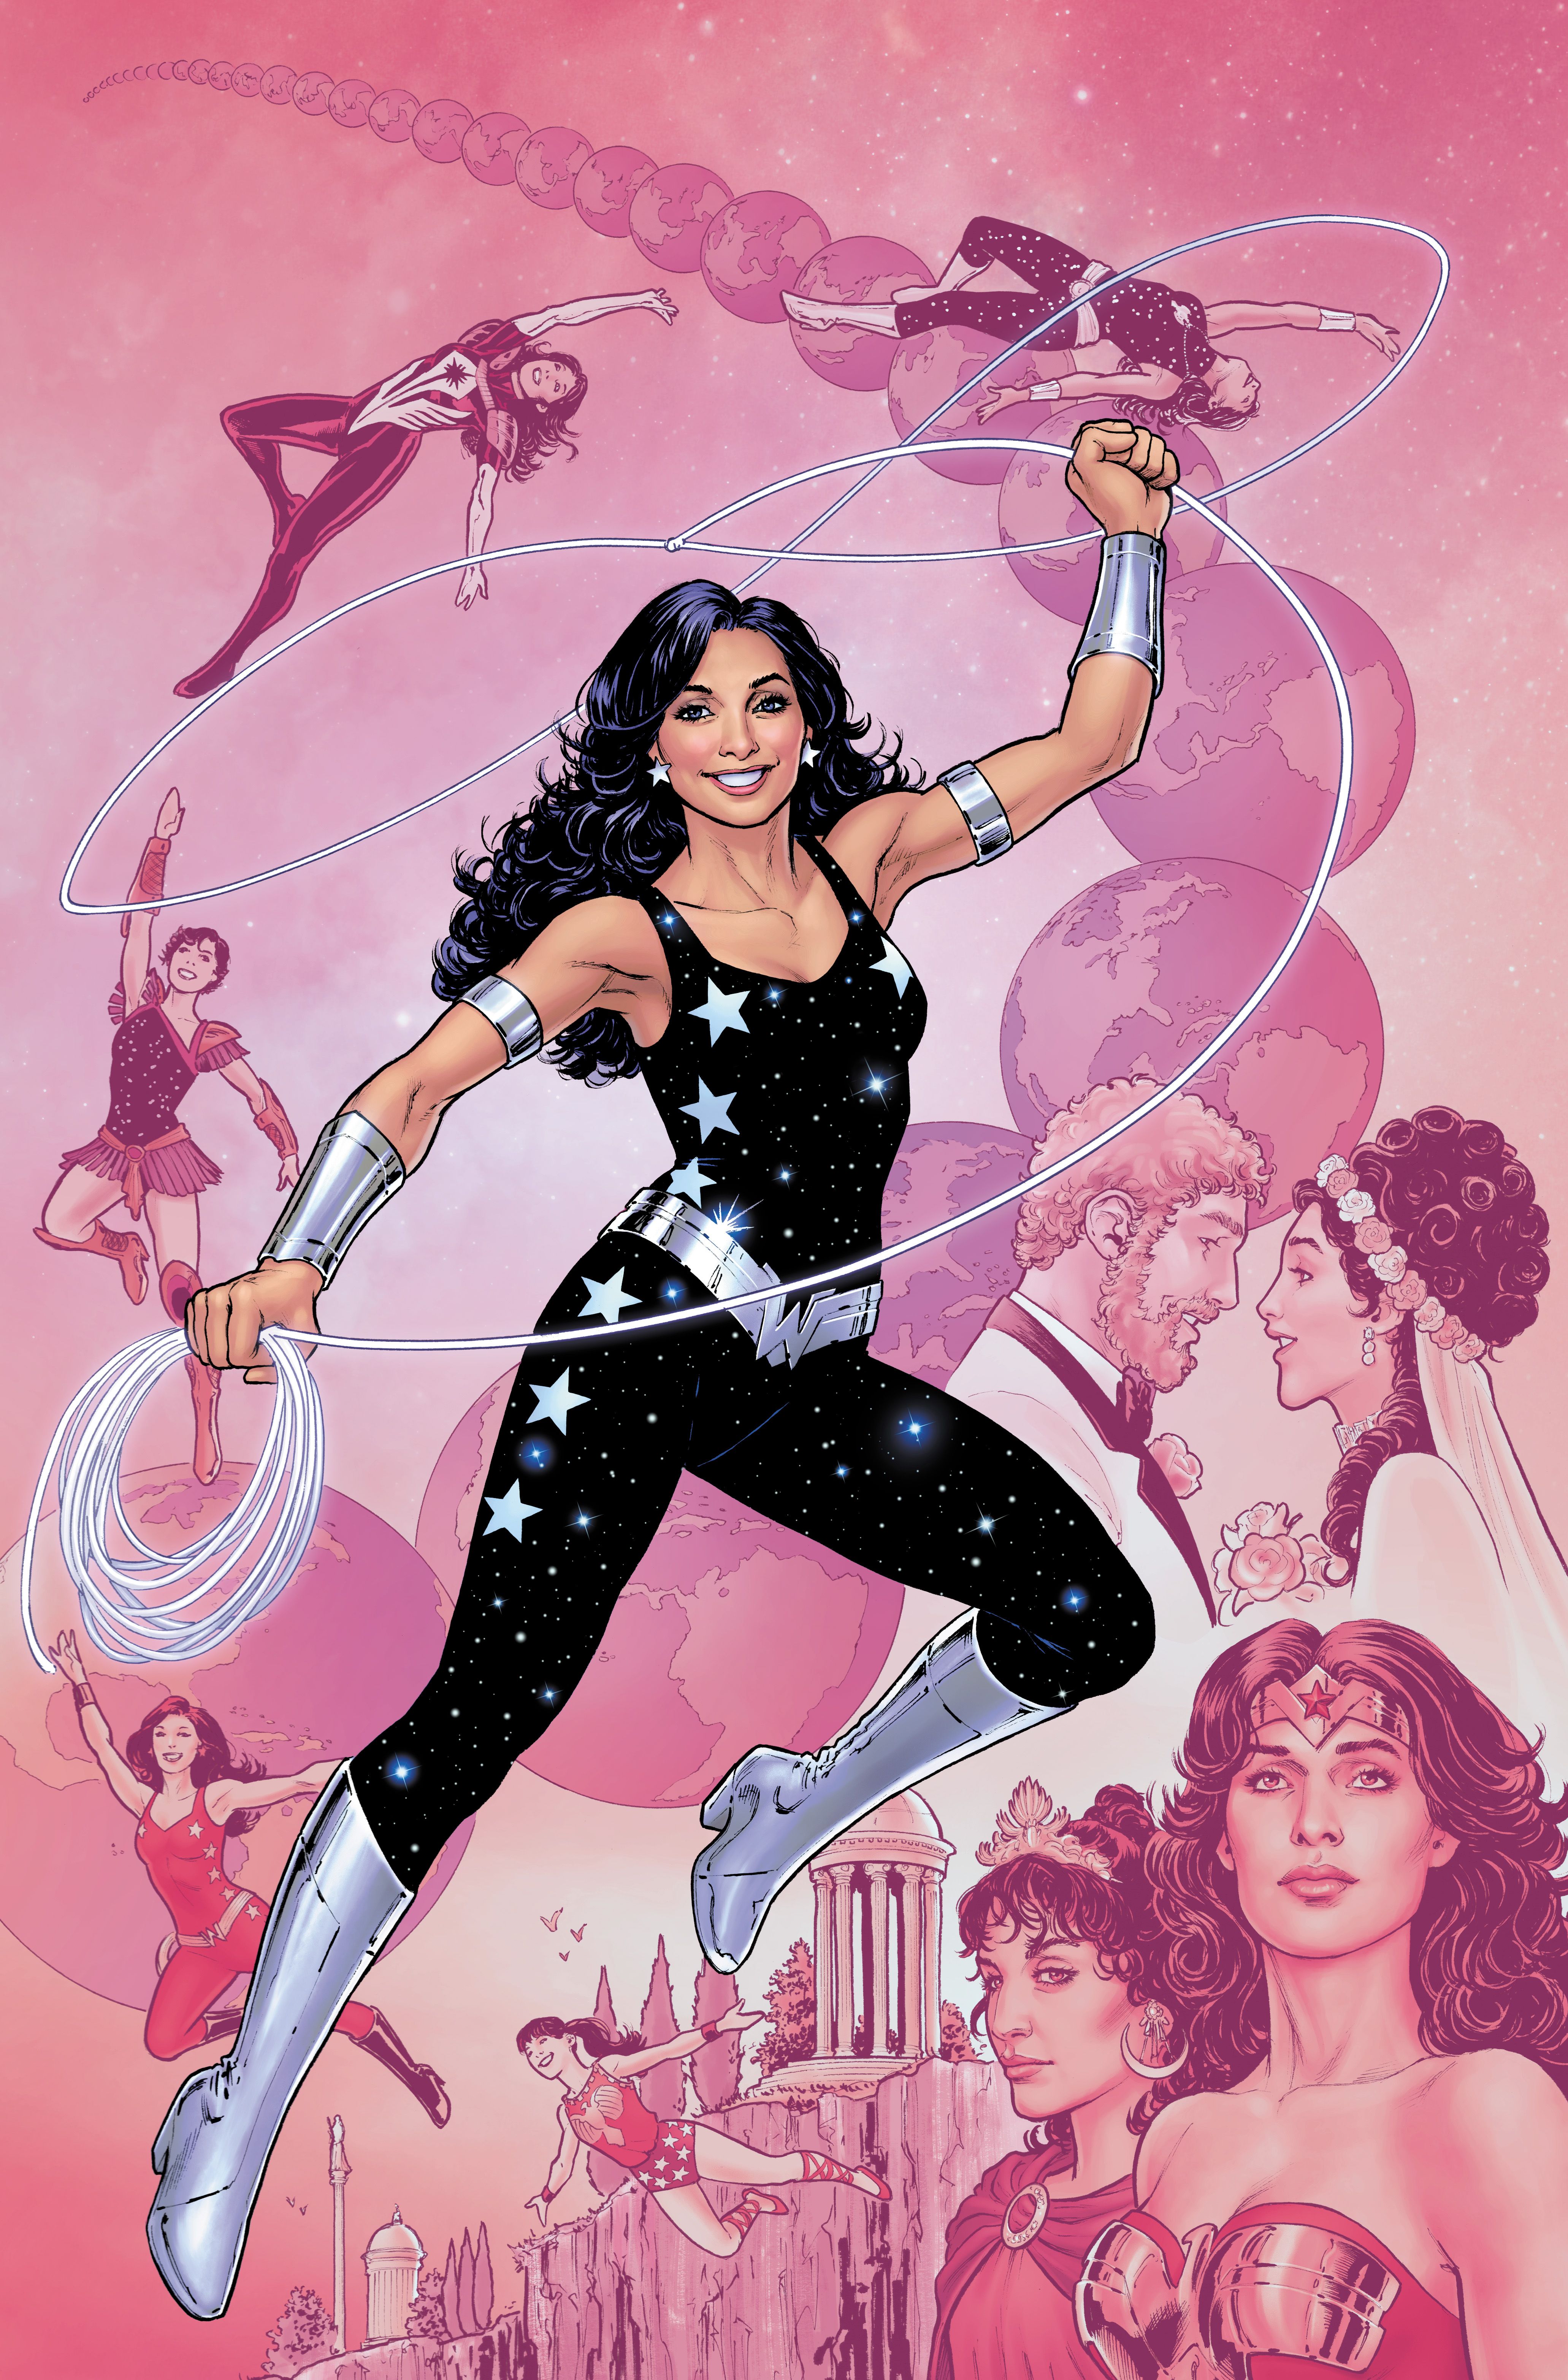 Donna Troy throwing around her lasso as she flies through a pink sky